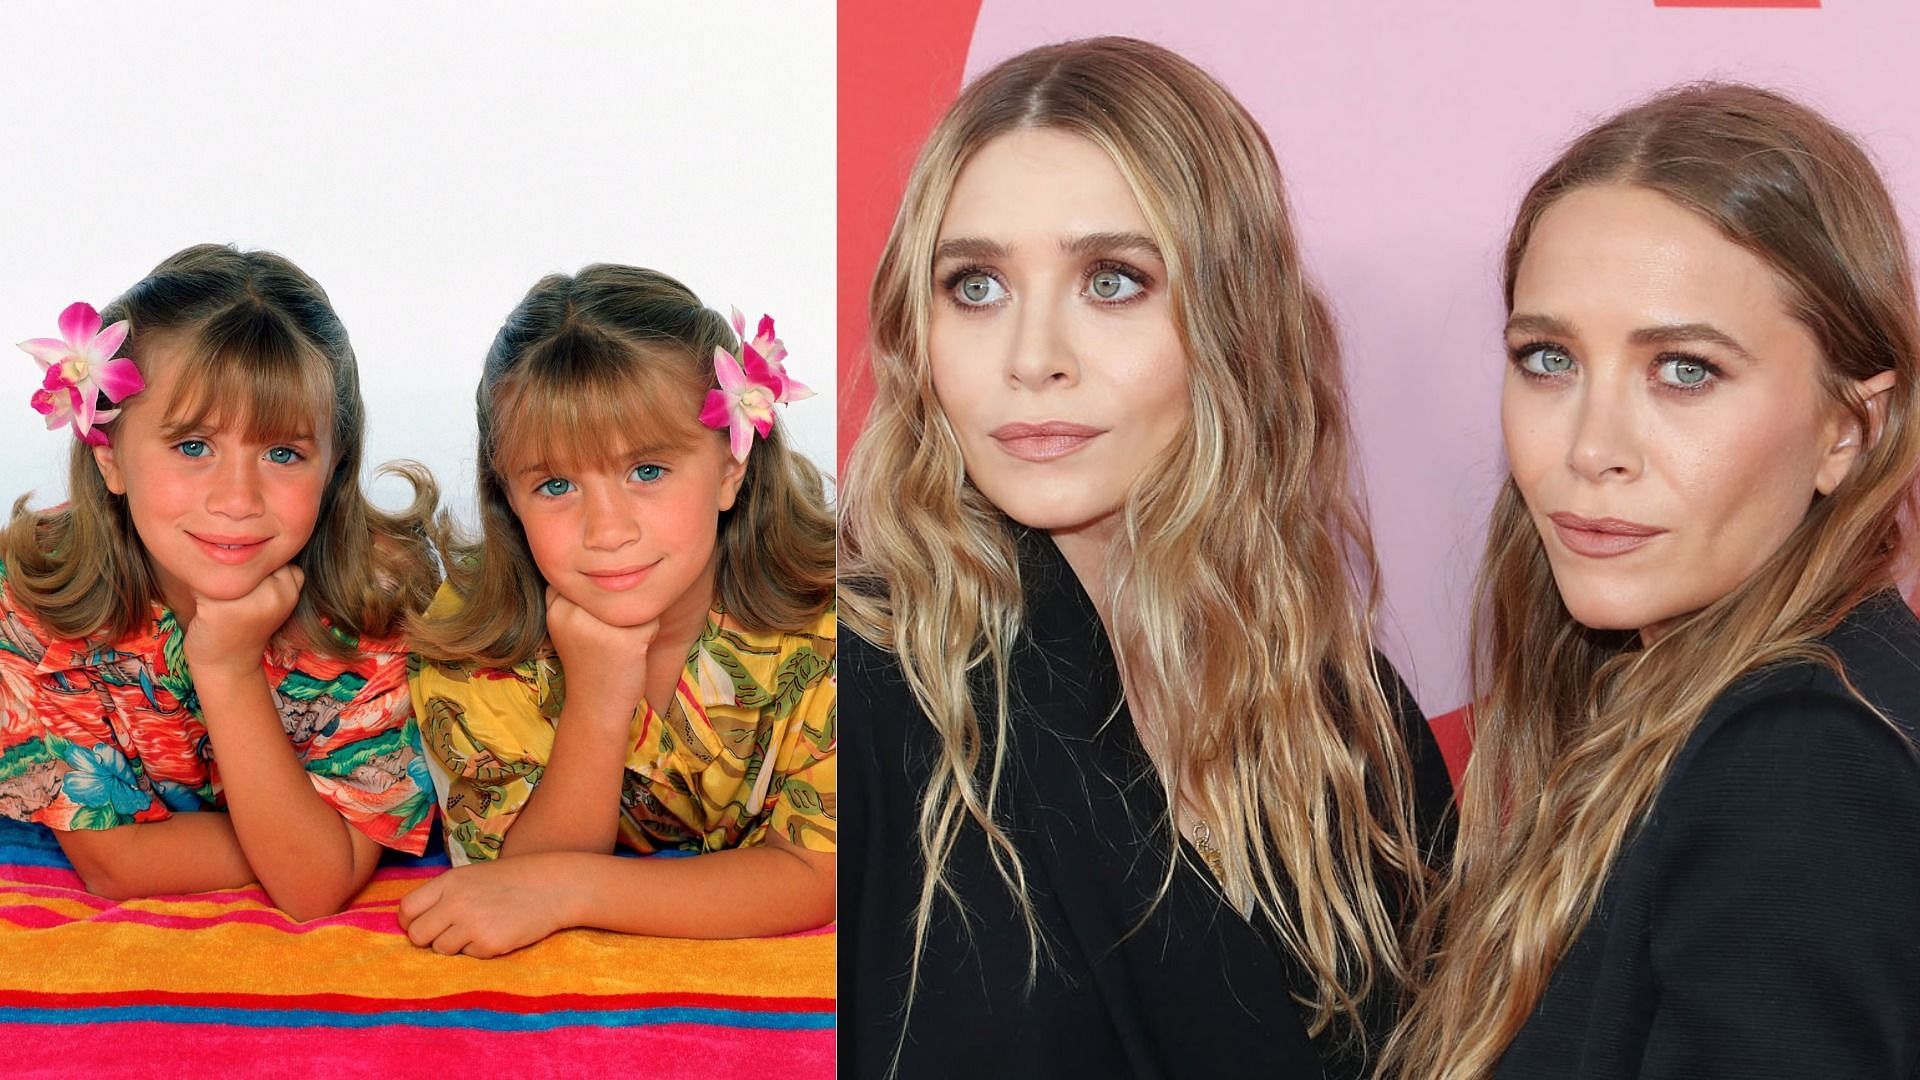 Where are Mary-Kate and Ashley Olsen now? Elizabeth Olsen’s clapback to paparazzi question about her sisters goes viral